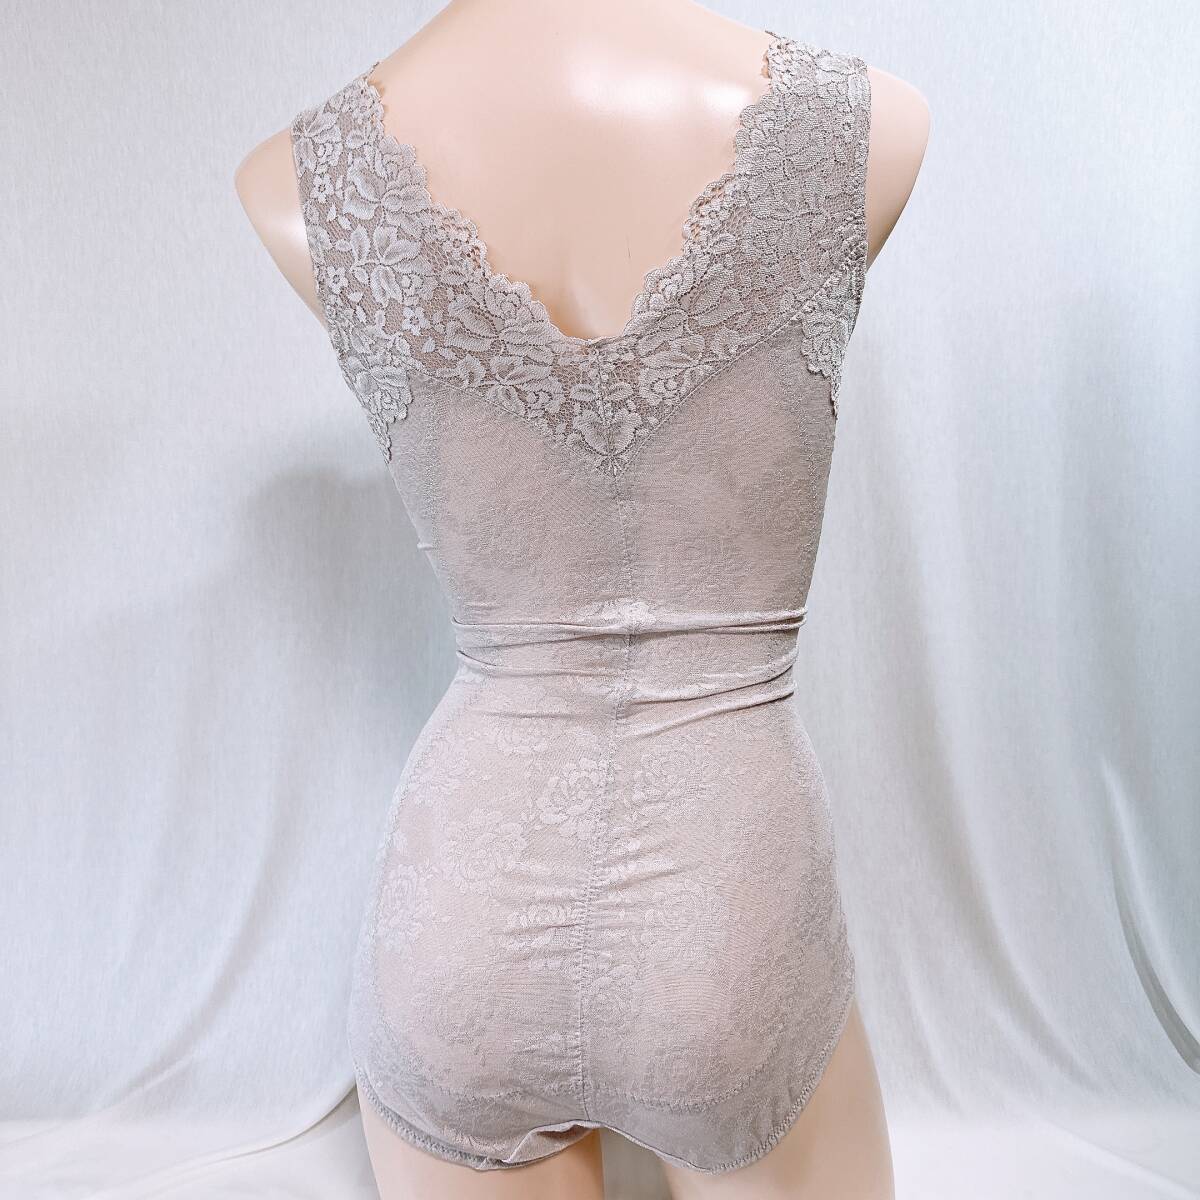 6* high class * body suit *C85LL wire entering 